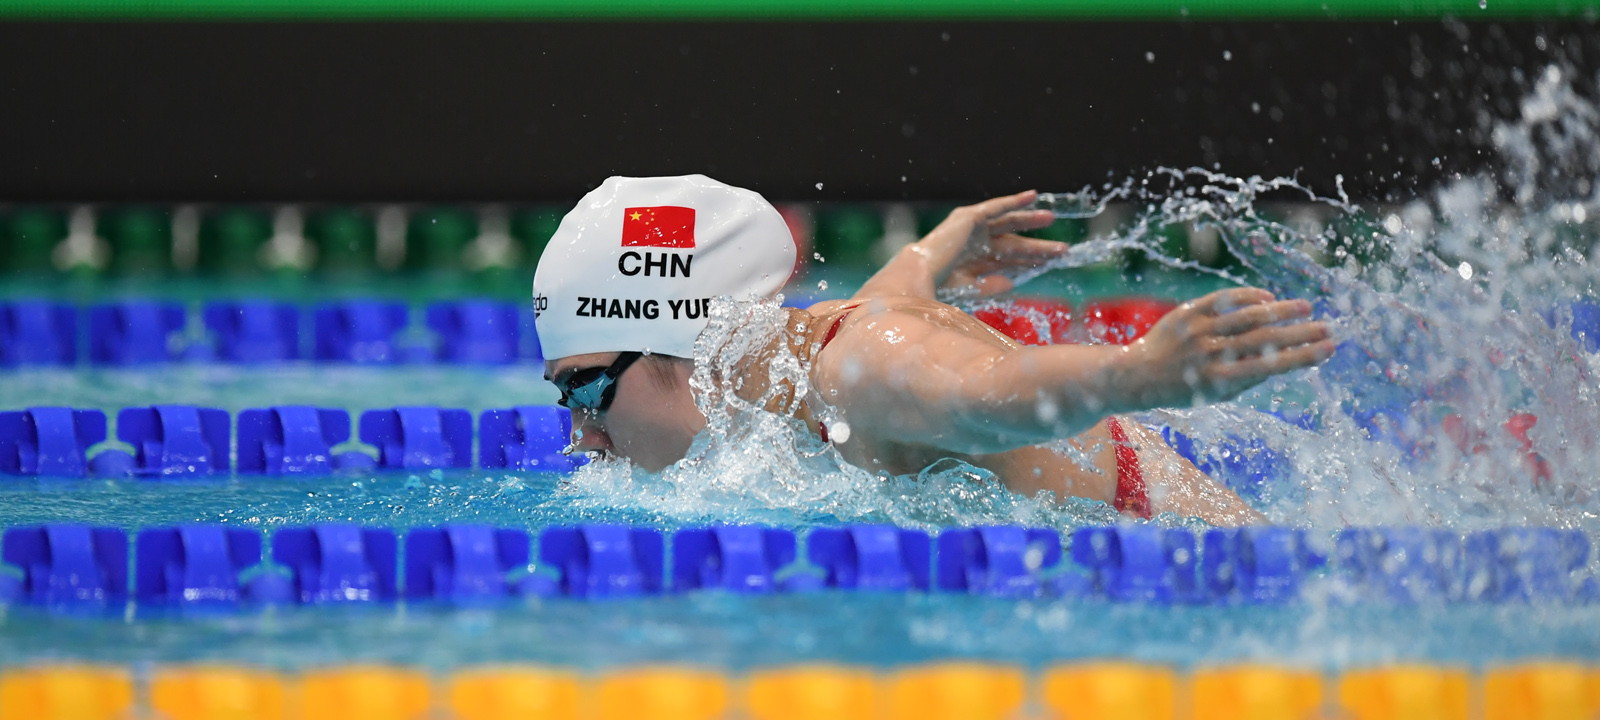 Zhang Yufei Hits 25.32 50 Fly Chinese Record To Collect 3rd Bronze Of The Meet